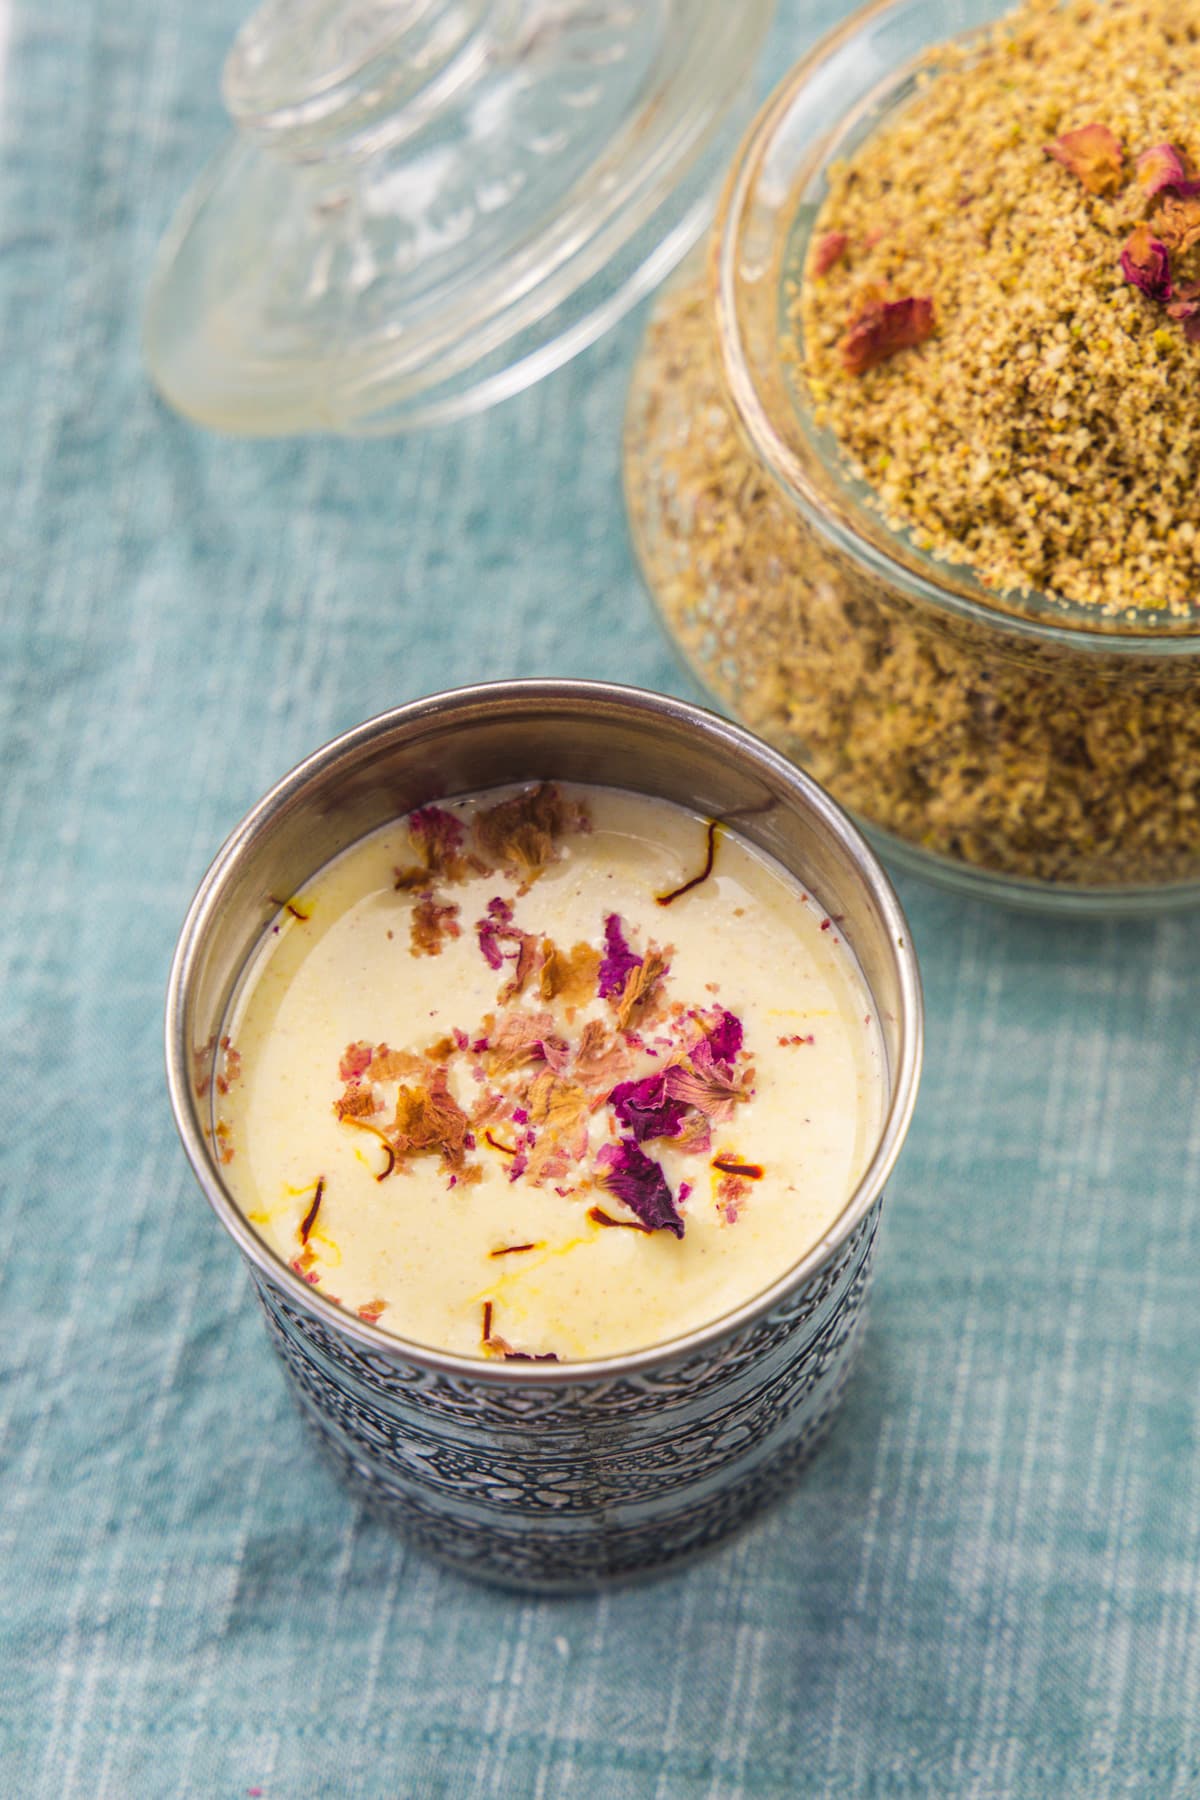 Thandai drink garnished with rose petals and saffron with thandai powder in back.